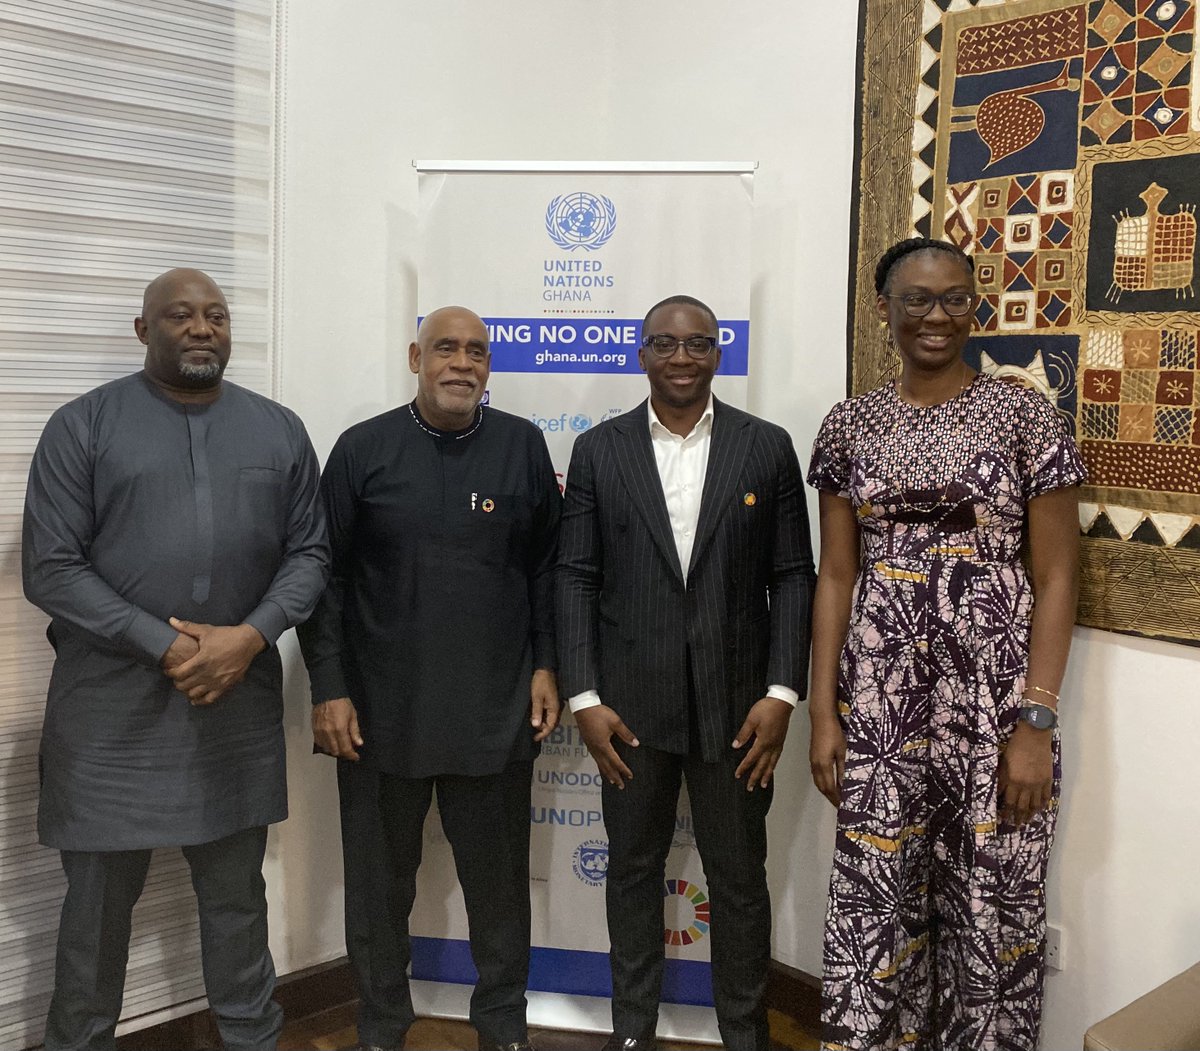 Exciting meeting last week! @SEforALLorg’s Energy Transition Office in #Ghana met with @charlesabani, Resident Coordinator of @UNinGhana, to explore collaboration opportunities for managing current & future energy efficiency projects aligned with our #energytransition goals!